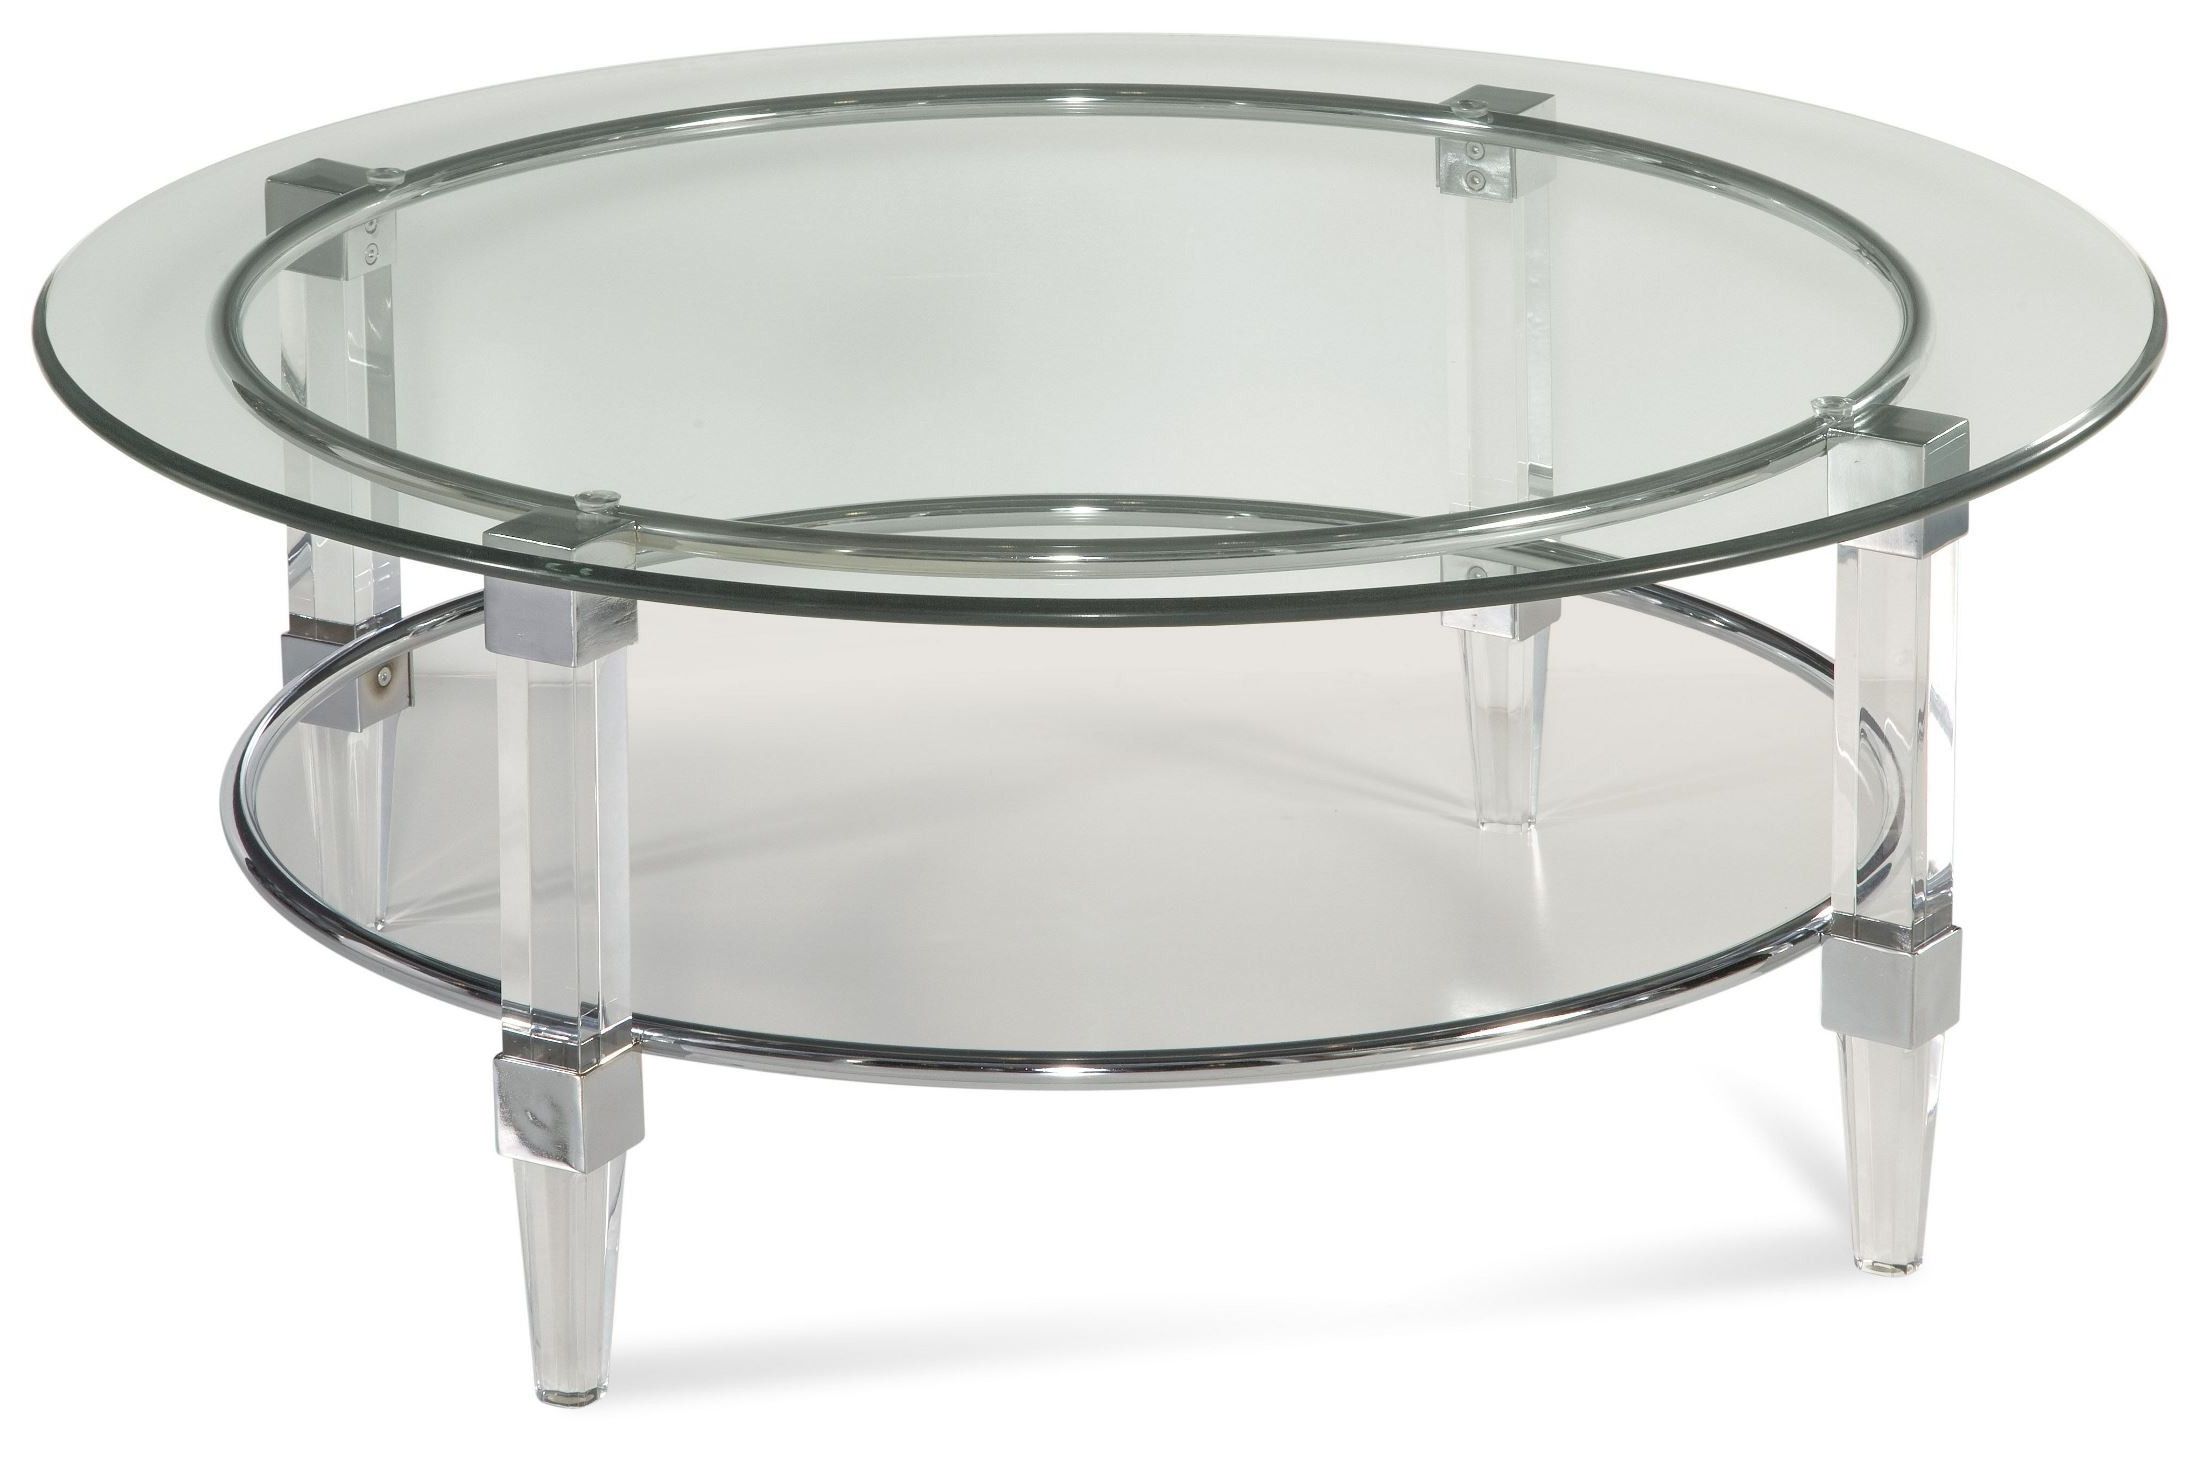 Cristal Acrylic And Chrome Cocktail Table, 2929 120ec Within Most Current Glass And Chrome Cocktail Tables (View 9 of 20)